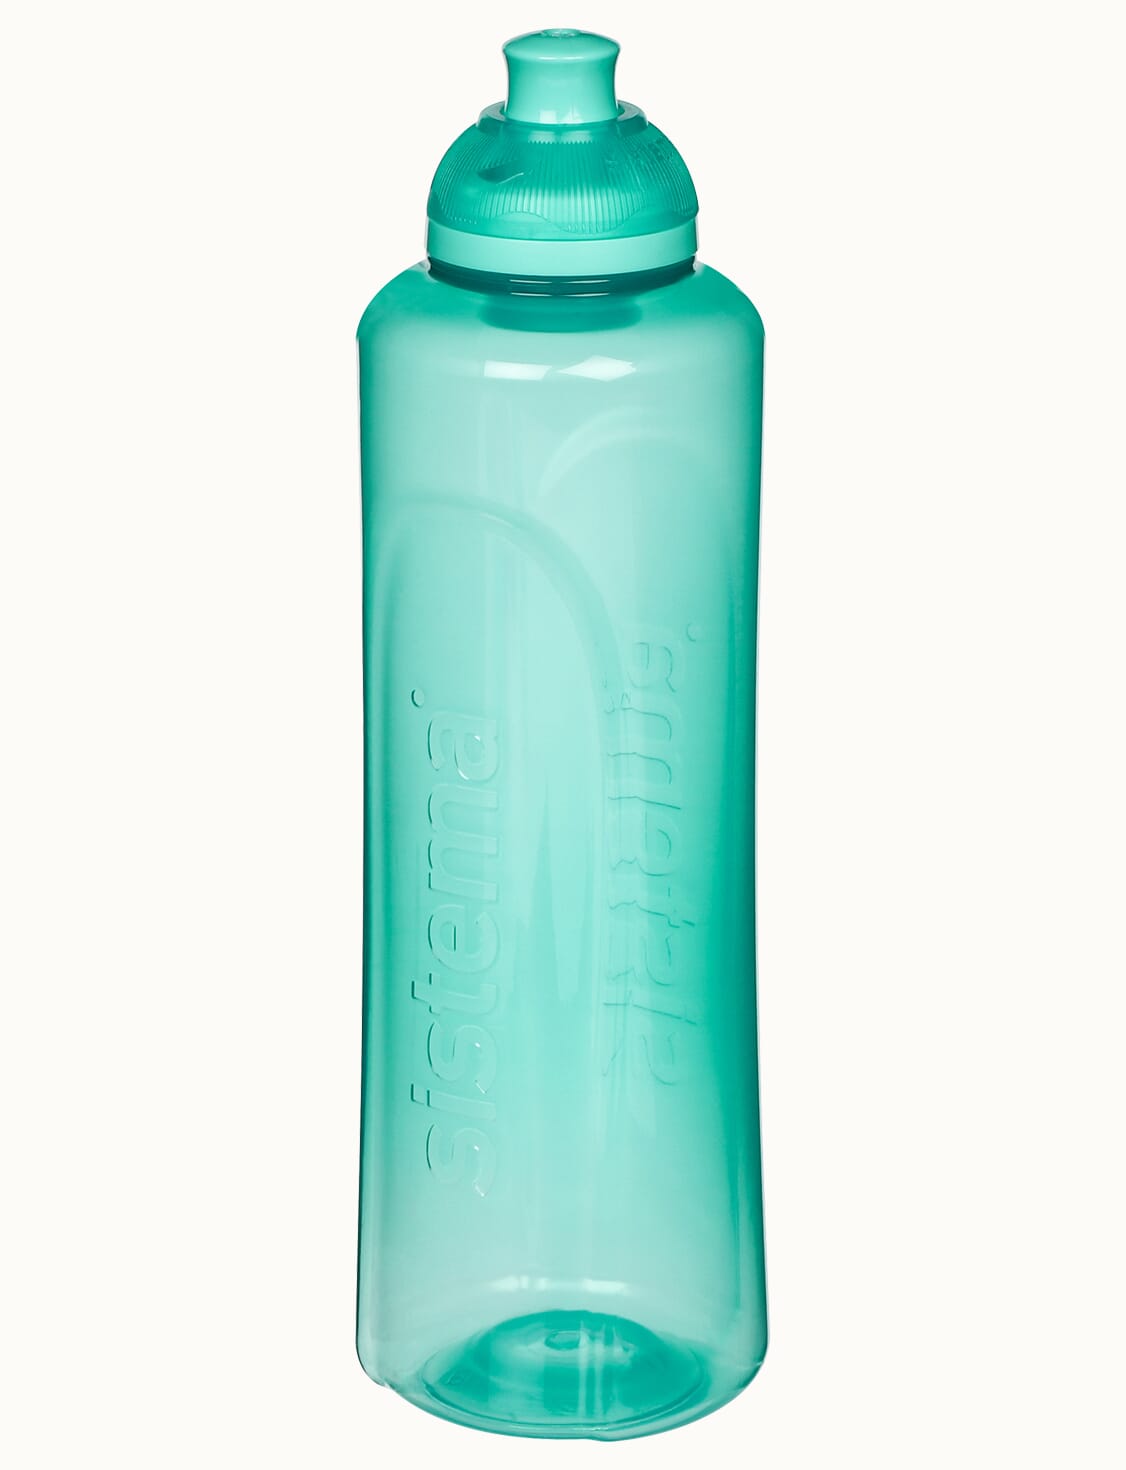 1 Liter Glass Water Bottle, Sports Bottle, with 65 mm Steel Cap and Pr